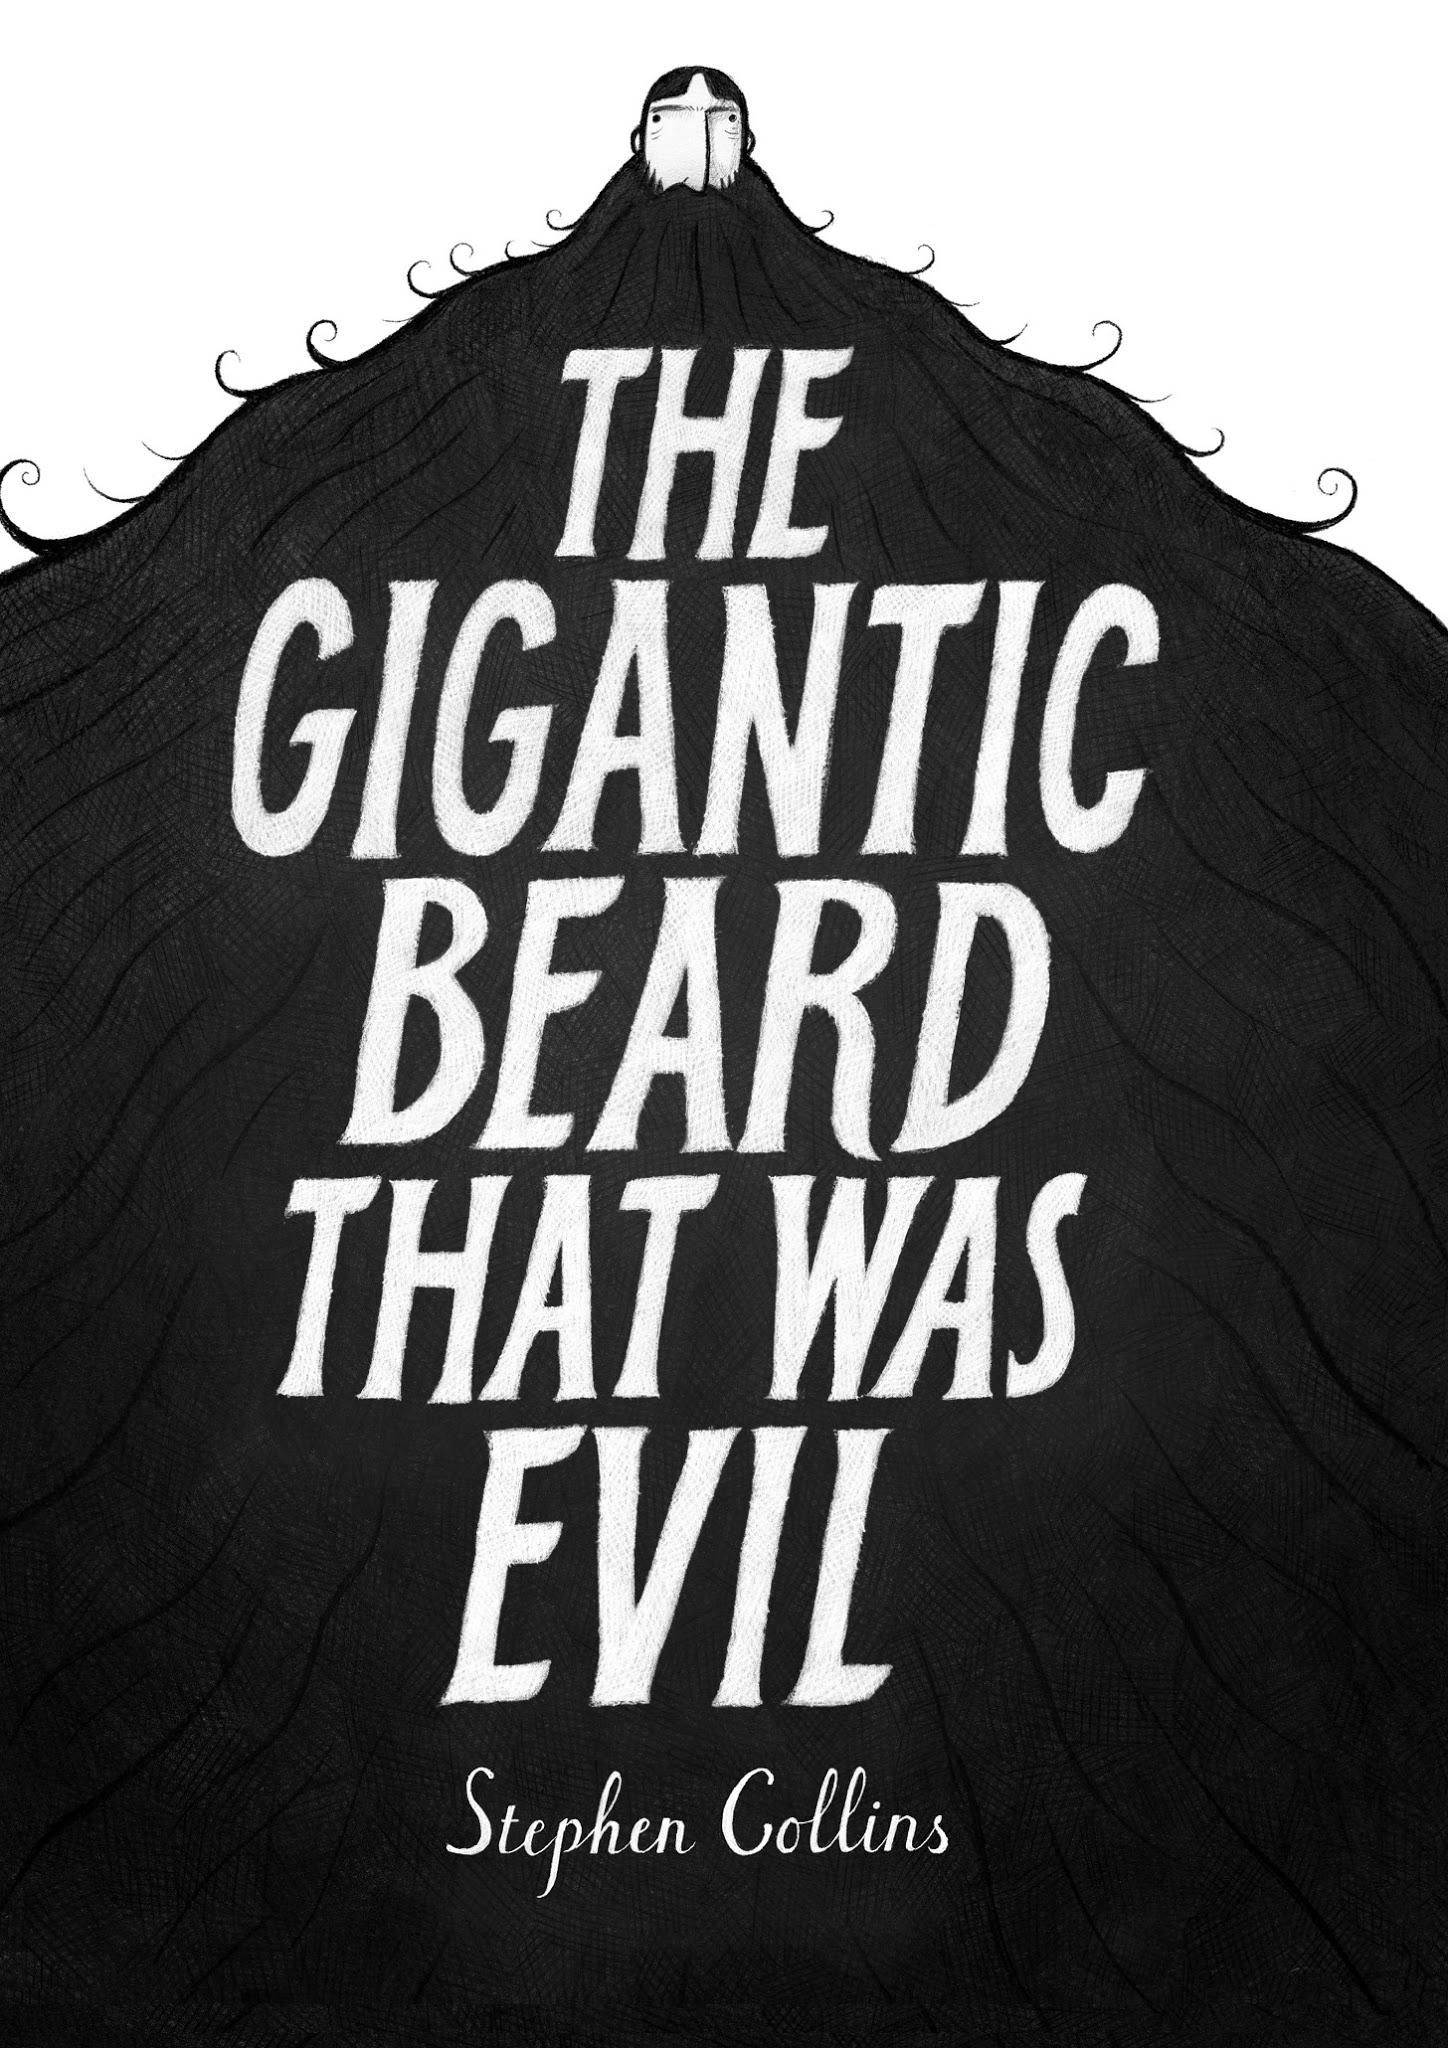 Read online The Gigantic Beard That Was Evil comic -  Issue # TPB - 1